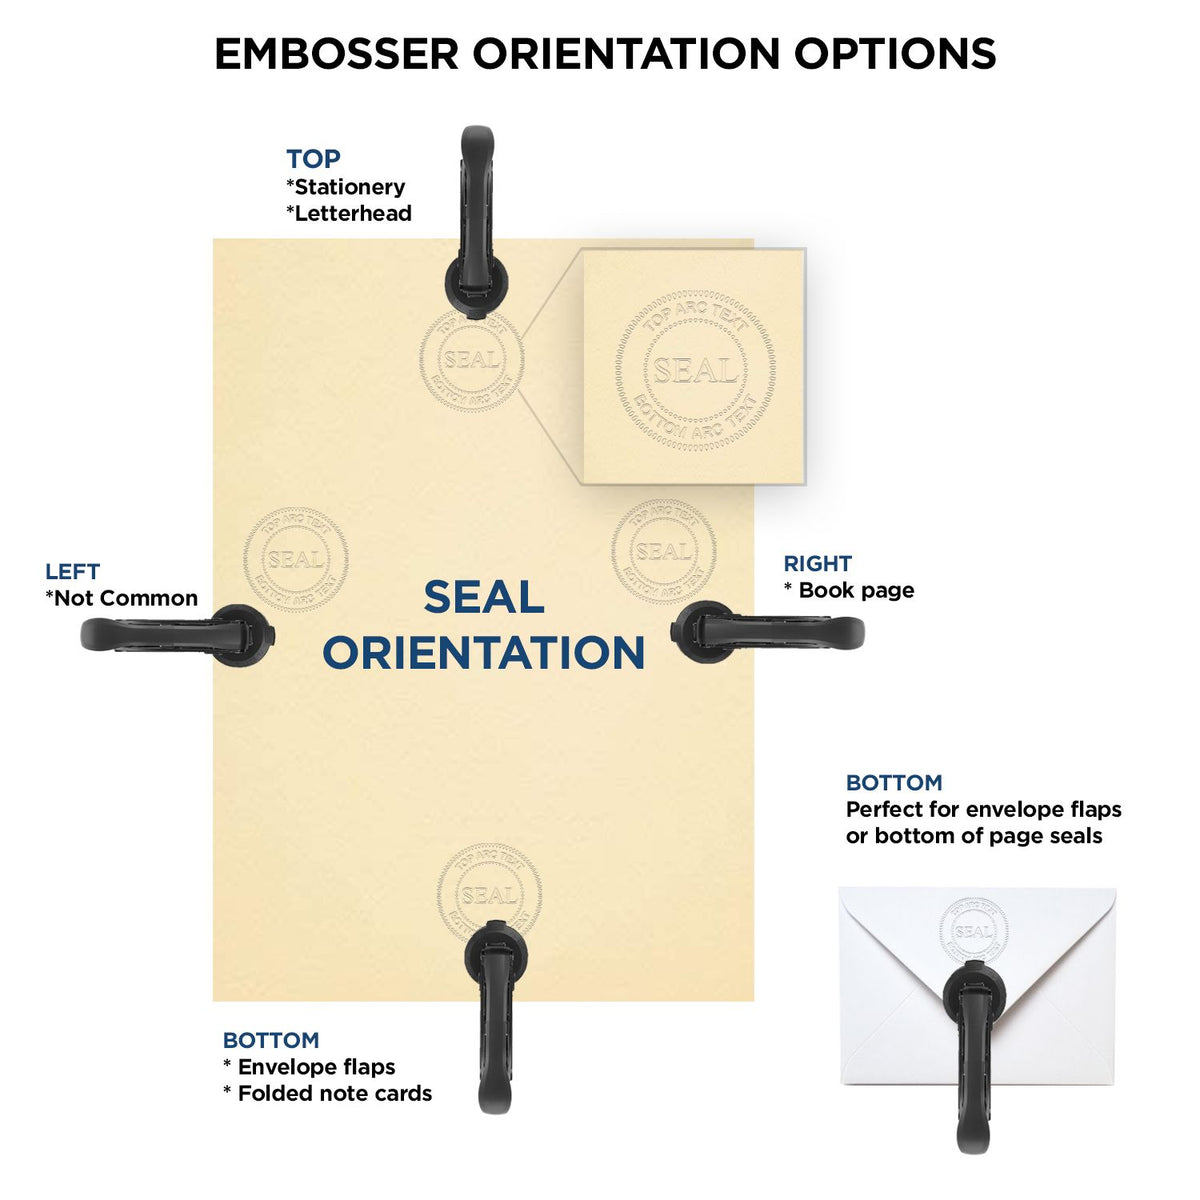 An infographic for the Utah Geologist Desk Seal showing embosser orientation, this is showing examples of a top, bottom, right and left insert.